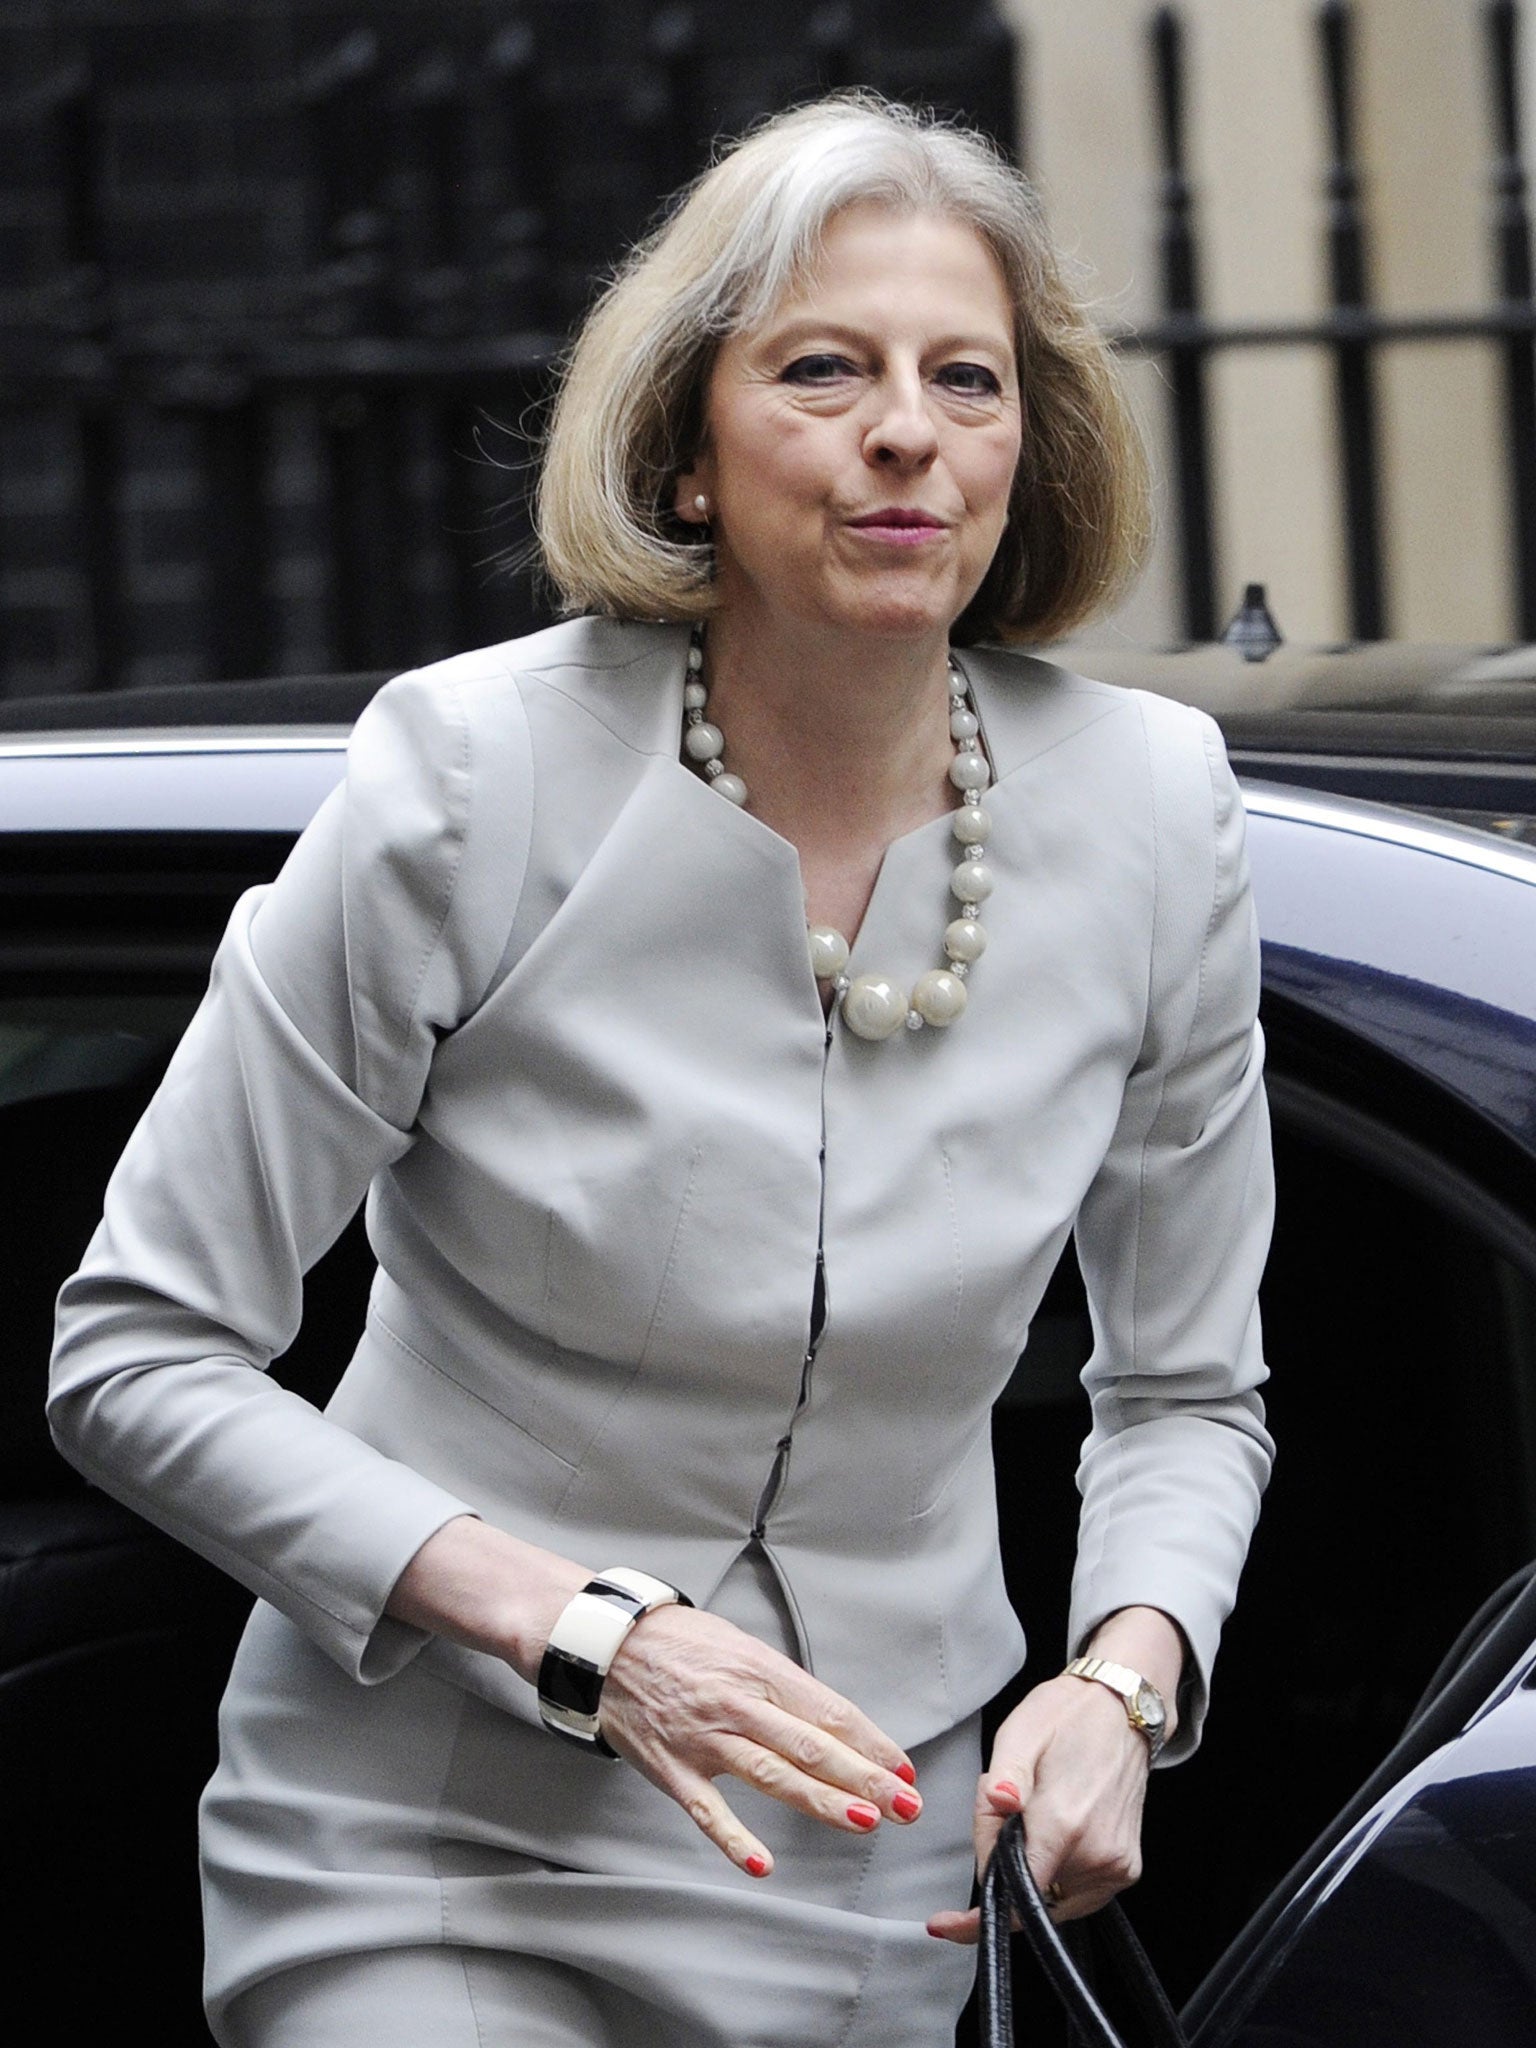 The Home Secretary was worried by The Independent's story about the extent of hacking